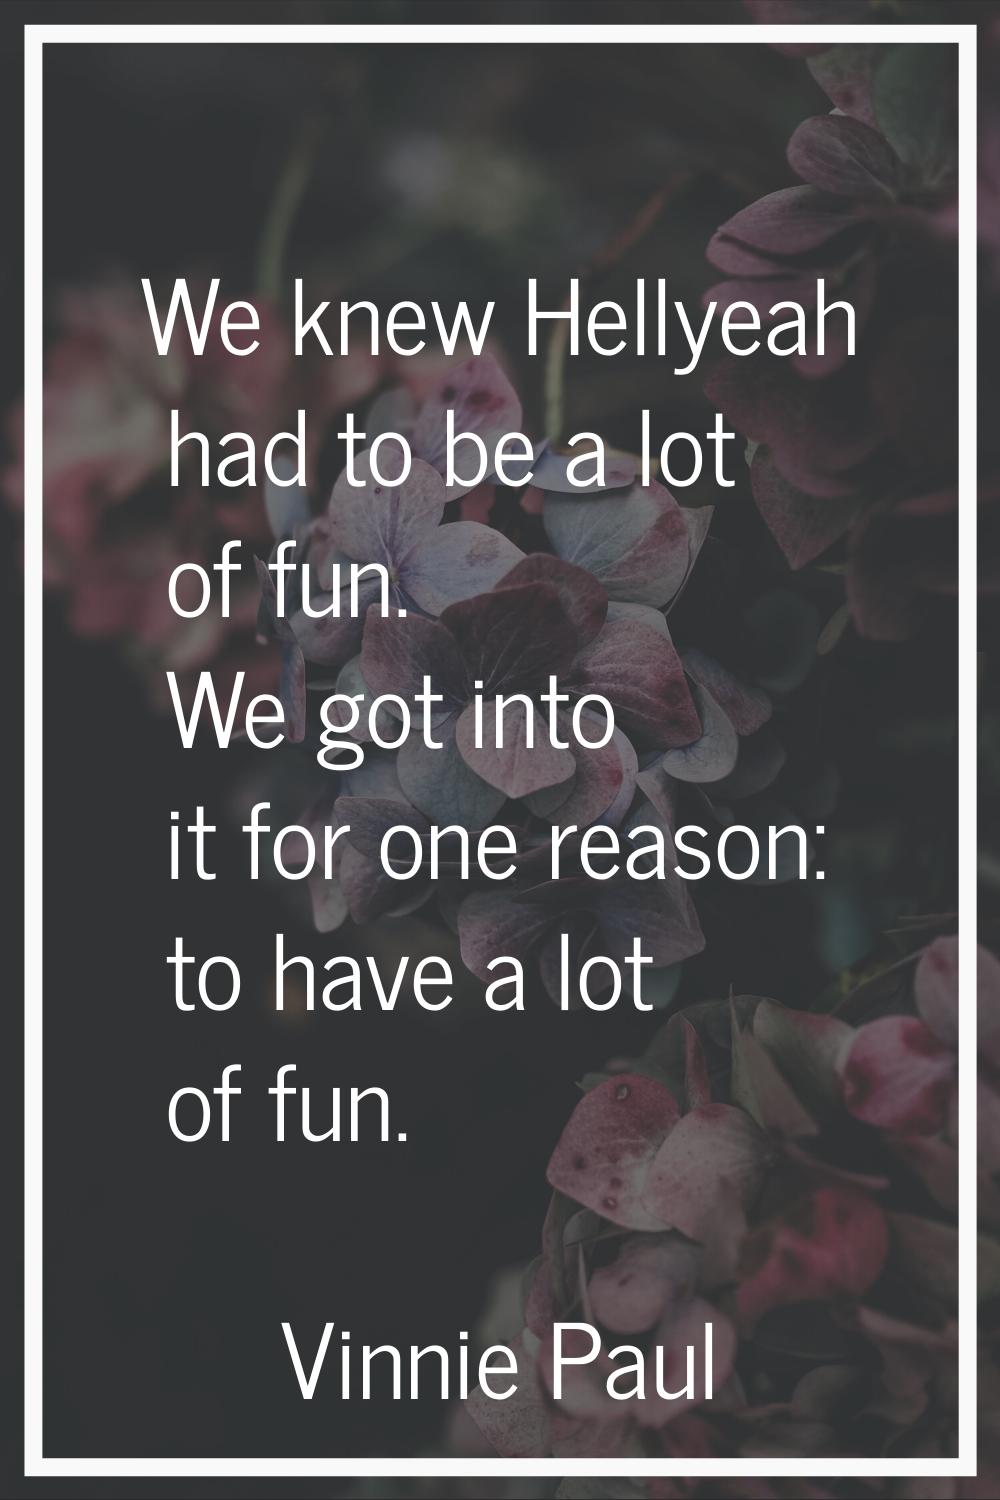 We knew Hellyeah had to be a lot of fun. We got into it for one reason: to have a lot of fun.